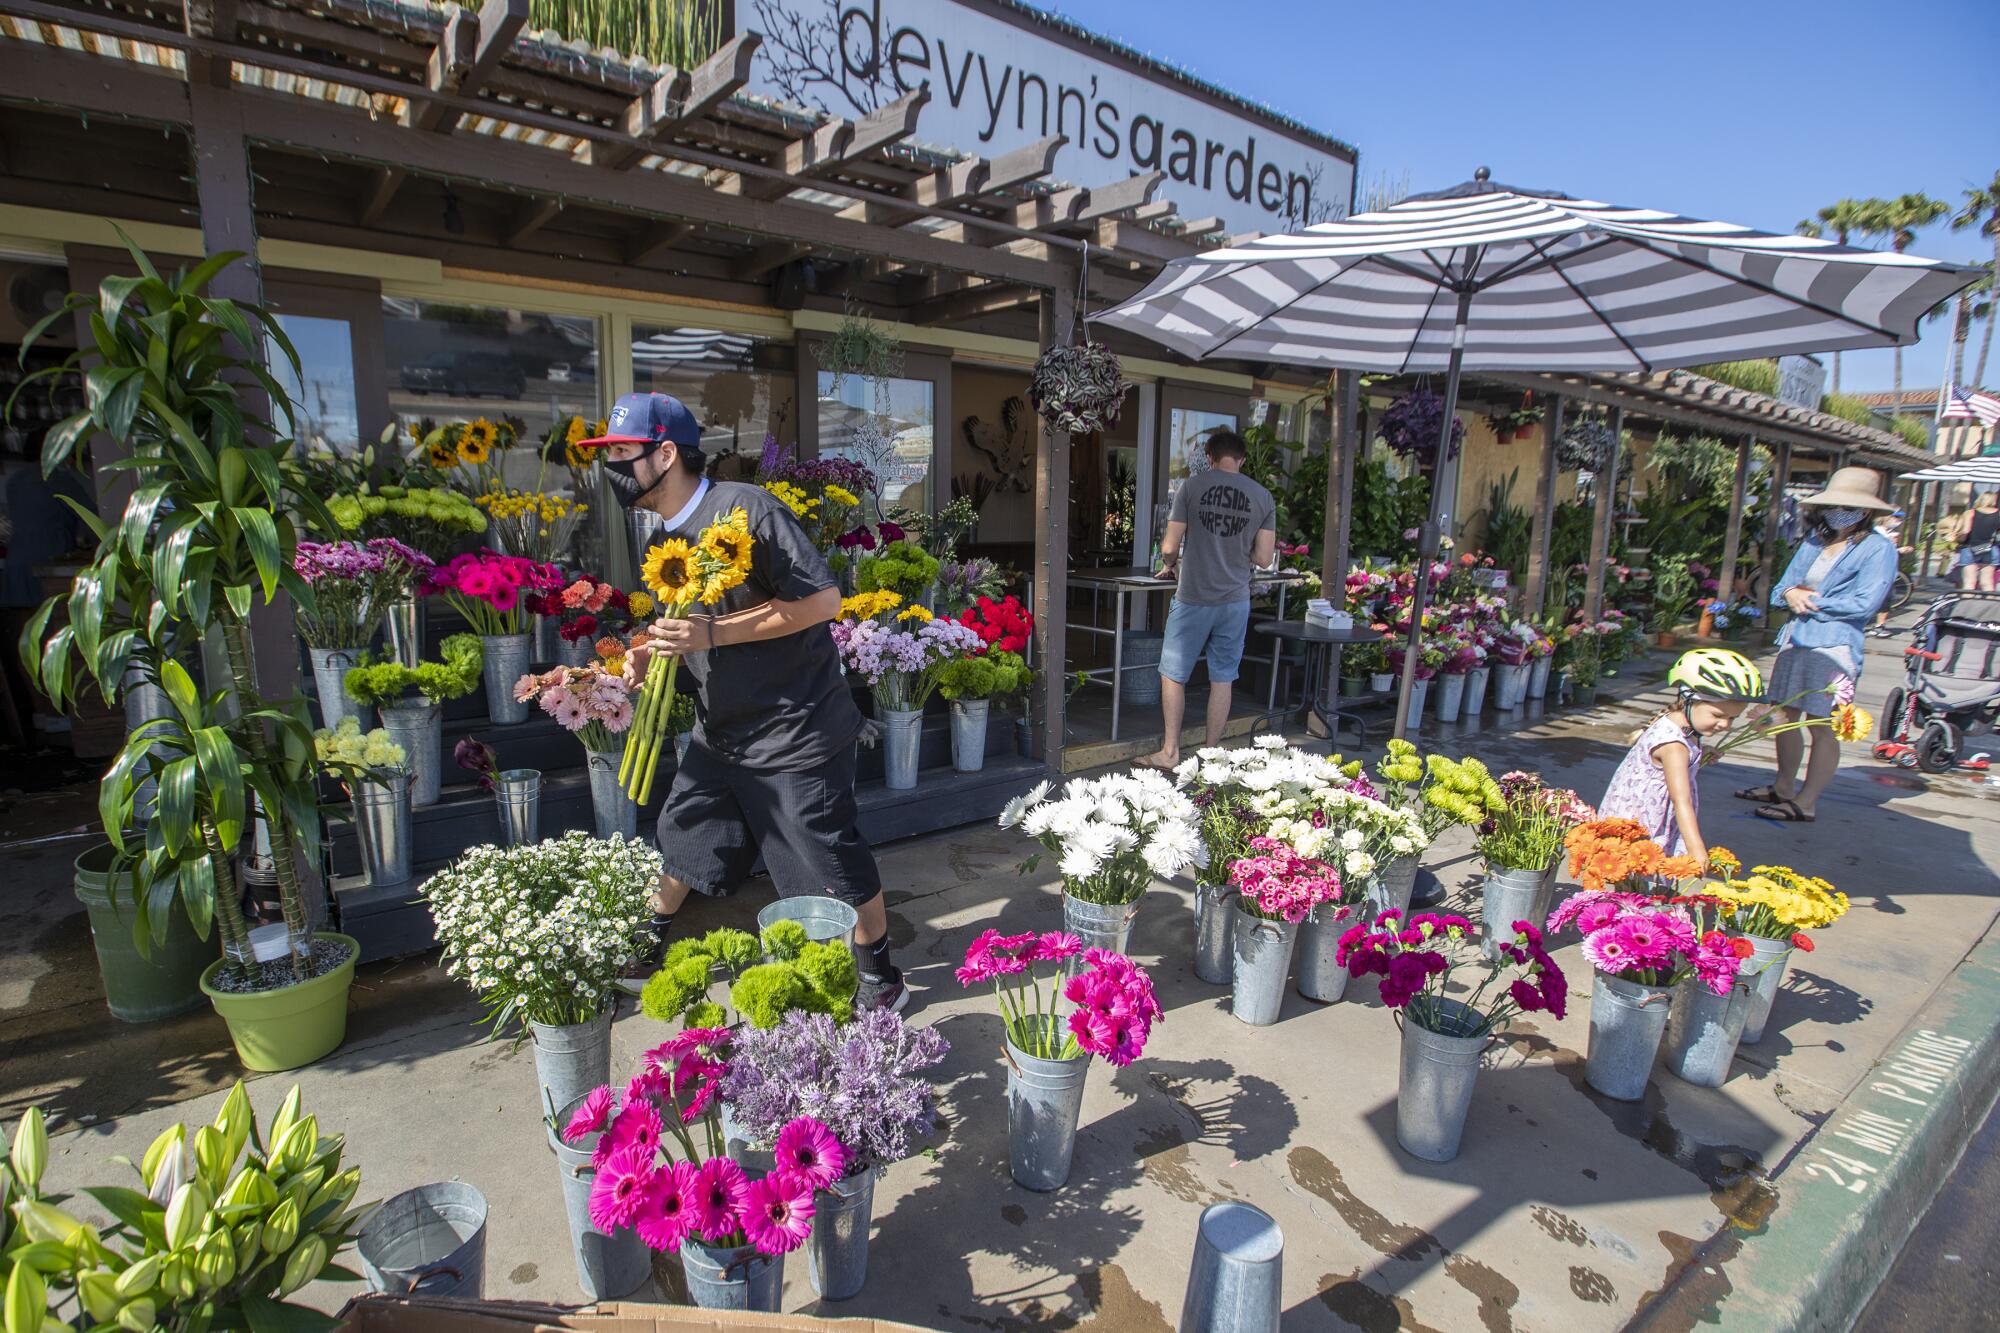 Employee Moy Ramirez, left, places flowers on display as Christina Dagle, right, and her daughter, Eleanor Eades, 4, buy flowers for a friend from Devynn's Garden in Seal Beach on Friday.